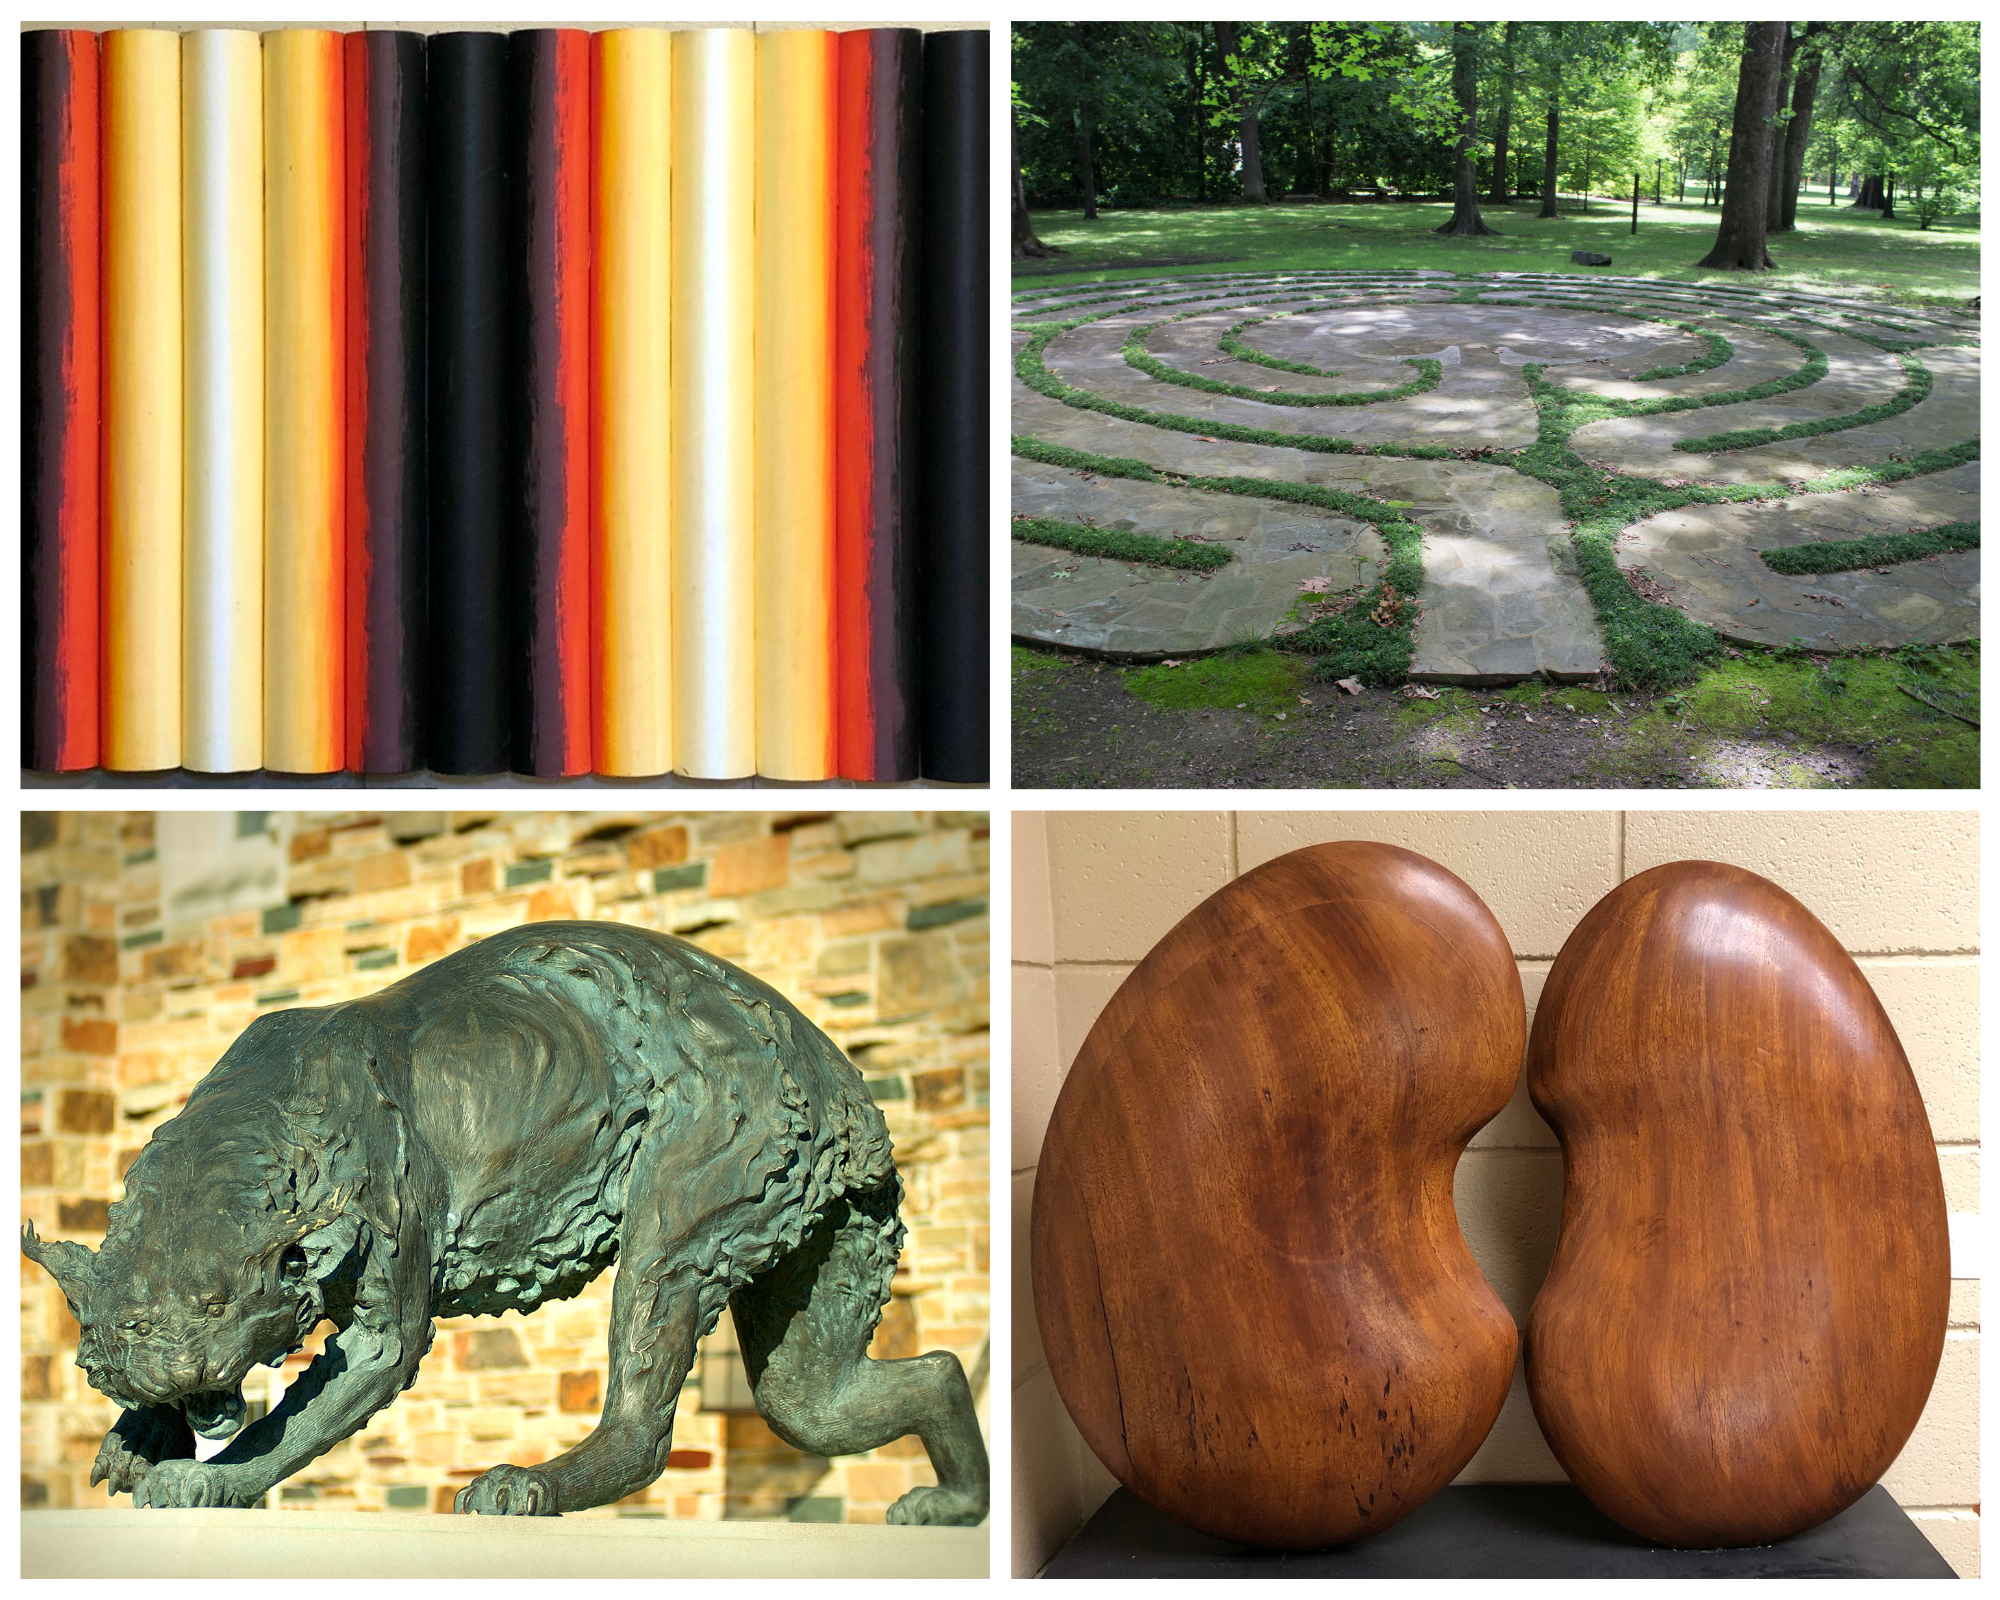 Sculptures from on Rhodes Campus. Top Left: Untitled by Betty Gilow; Bottom Left: "Lynx" by Anne Moore; Top Right: "Rhodes College Labyrinth"; Bottom Right: Untitled by Judith Morrow